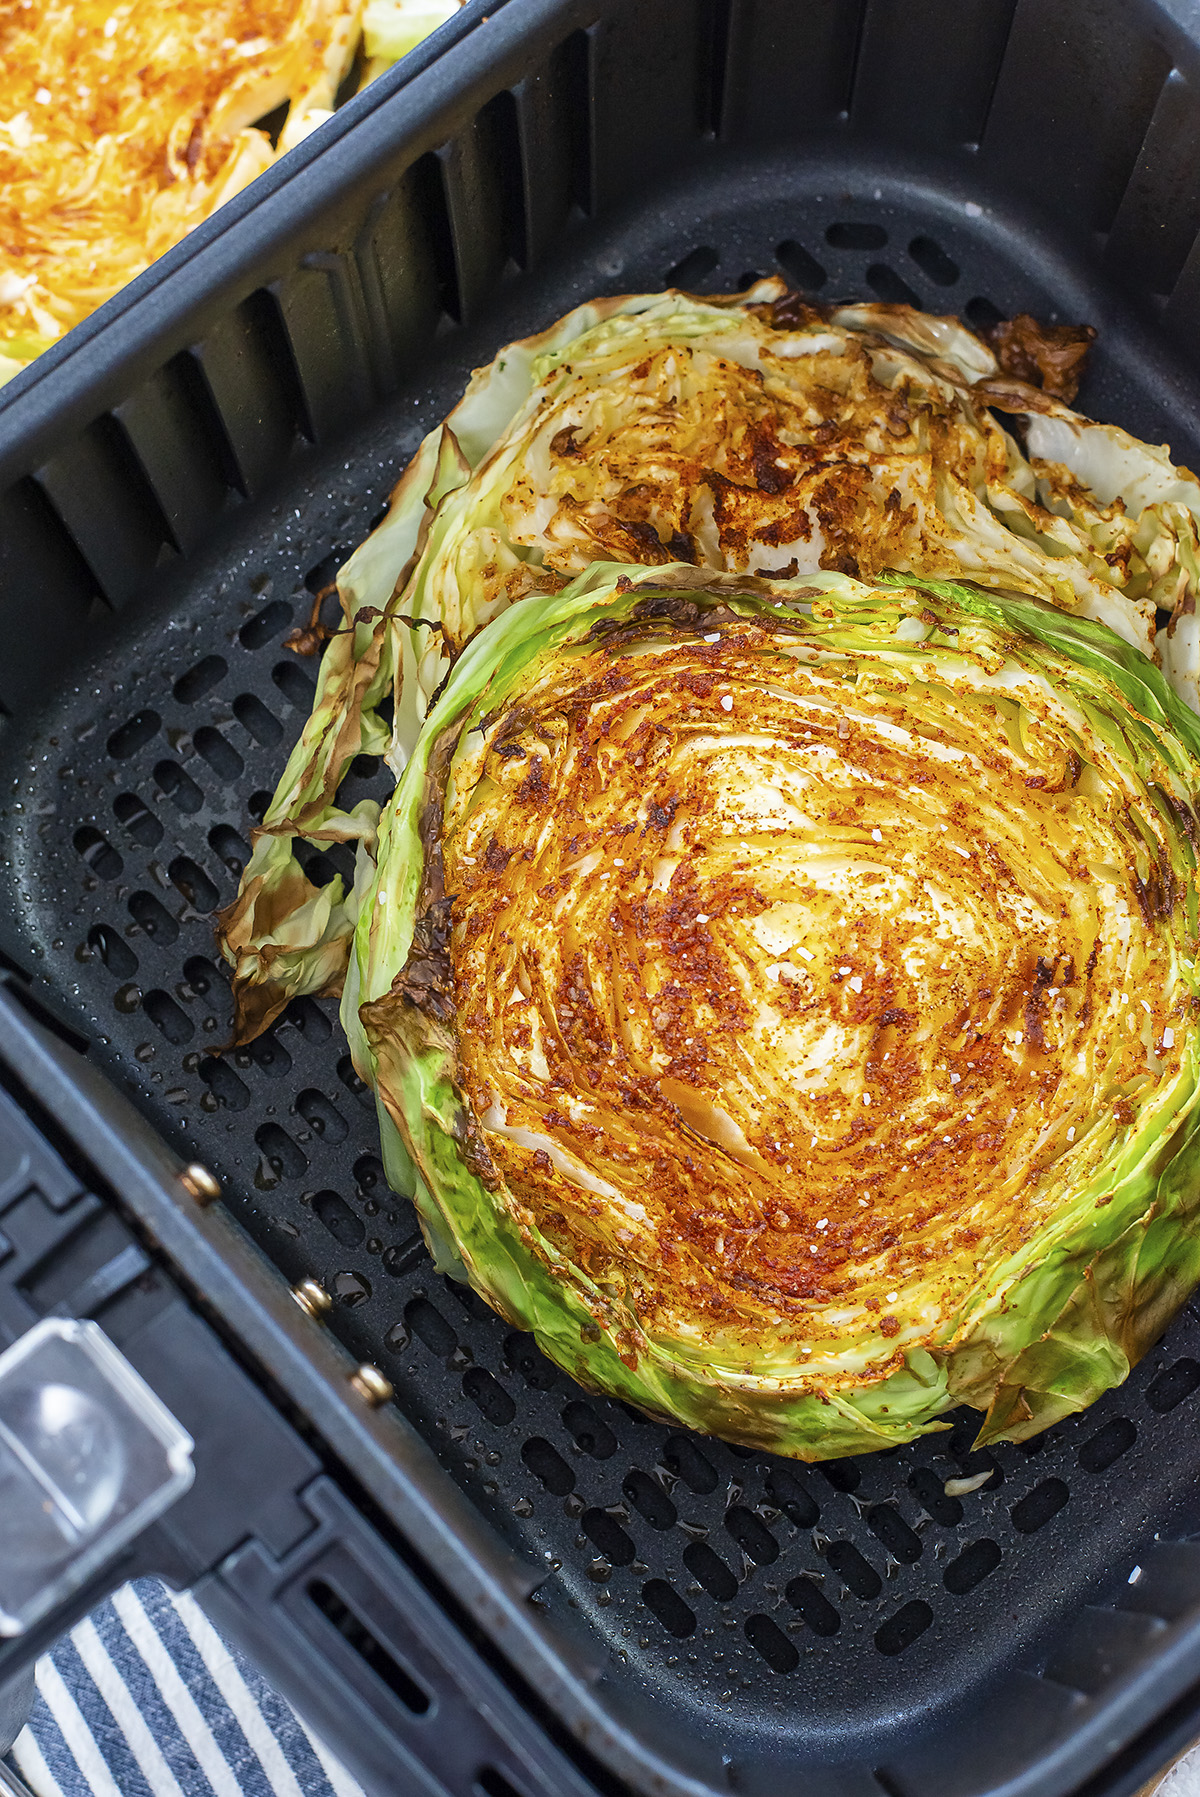 A whole cabbage steak cooked in an air fryer basket.